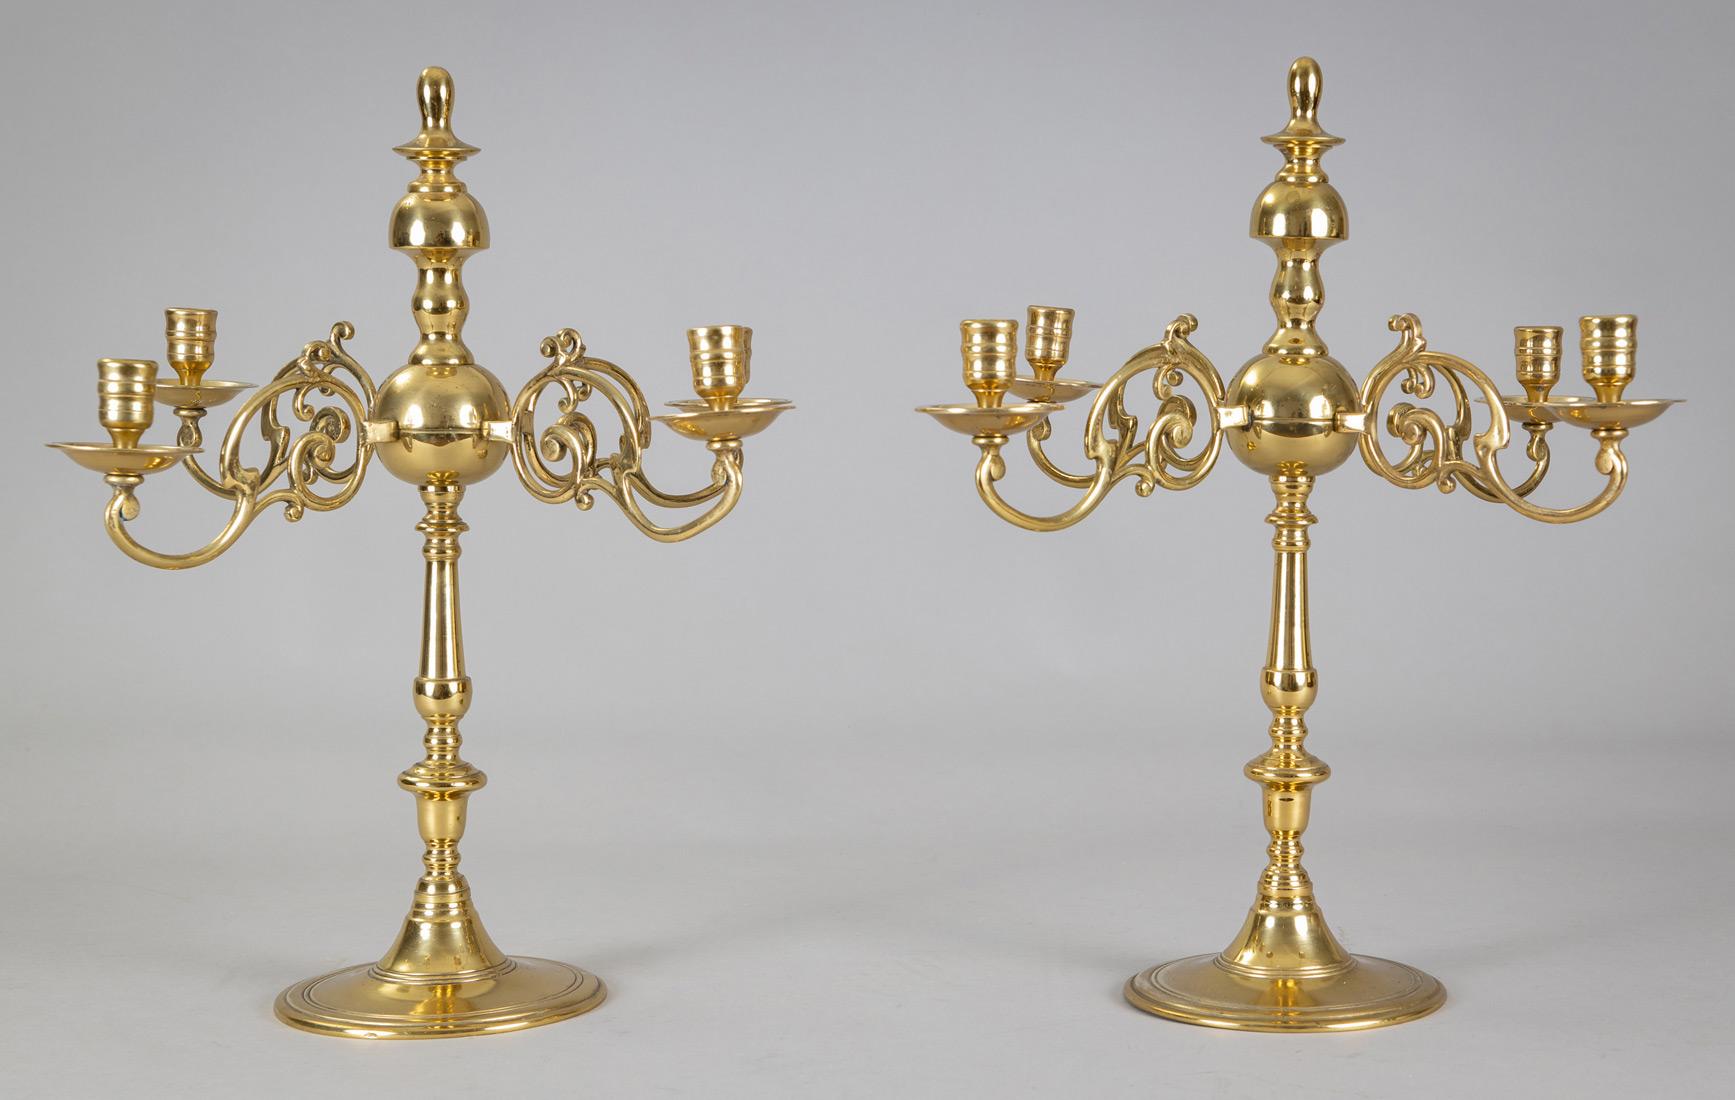 Pair of English solid cast brass four-arm candelabras on a circular base, the arms emanating from the ball on the turned central shaft, the arms are decorated with spurs, the candle cups have ring turnings and the bobéches are deep. Not electrified.